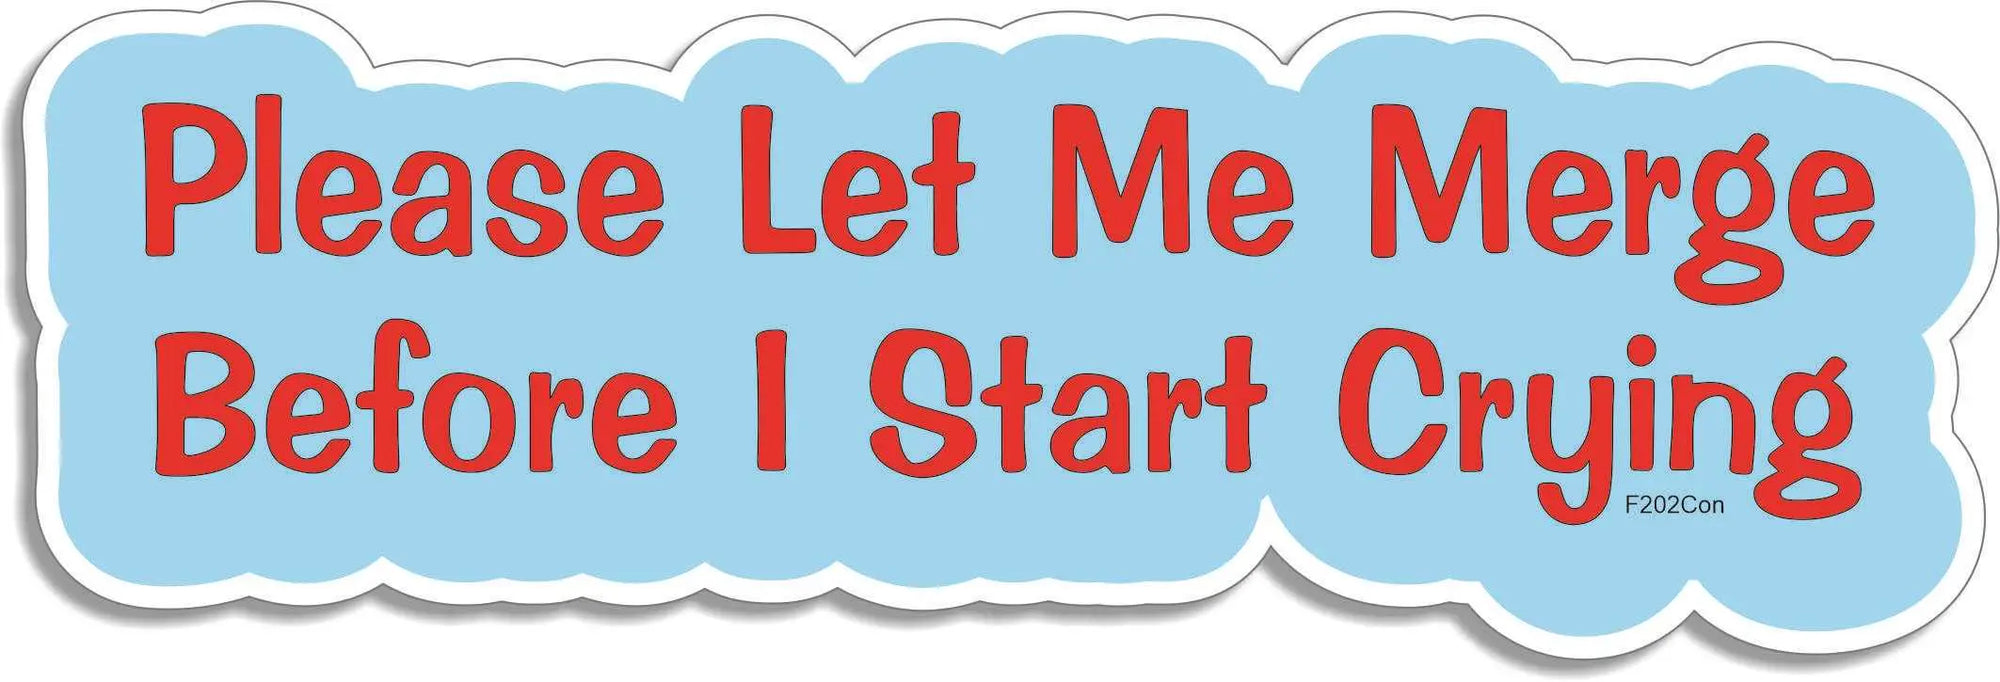 Please Let Me Merge Before I Start Crying - Funny Car Stickers, Phone Stickers Humper Bumper